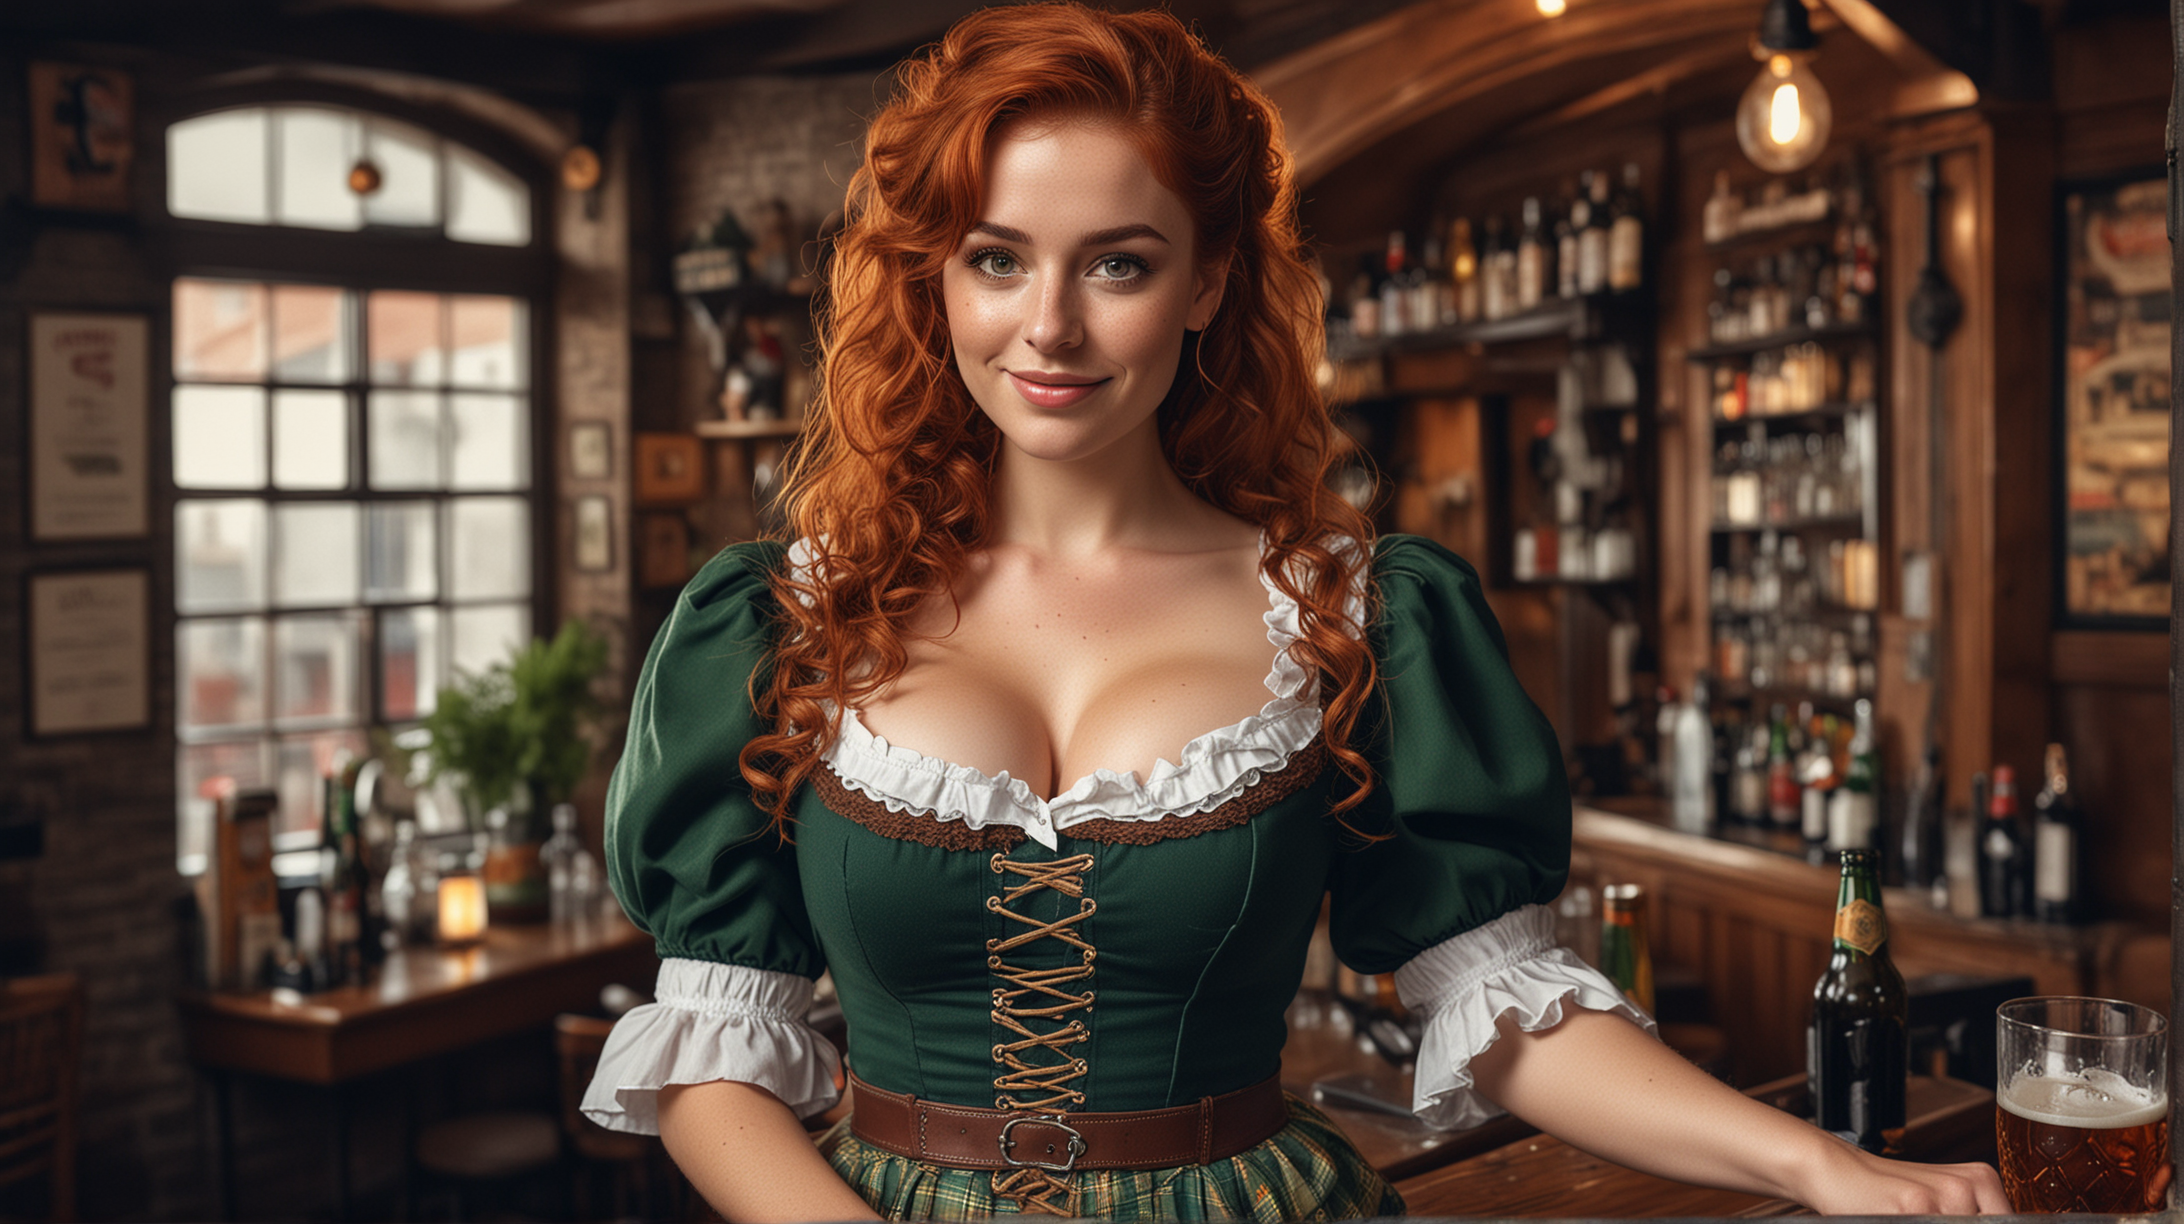 A high-resolution photograph of a beautiful middle-age Irish woman. She's standing in an old Irish pub.  Her very-long curly red hair cascades around her shoulders.

She's wearing a plunging low-cut dark green Oktoberfest Beer Girl costume with puffy sleeves that shows lots of cleavage.  Short matching ruffled skirt.  She has very large breasts.  White thigh-high socks. Heavy dark eyeshadow. Flirty smile.  She has freckles across her cheeks and nose. 

Vivid colors. clean sharp focus. Thin waist. Wide hips. Every detail is meticulously rendered, from the ultra-detailed lighting to the subtle imperfections that lend authenticity to the image.

With a blend of studio and natural lighting, high contrast, and ray tracing techniques, the photograph achieves a level of realism that brings the scene to life. Random details, such as the texture of the woman's skin and the pores that dot its surface, add depth and dimension to the image. dark vignette around the photo, zoomed out to capture her full body, low angle